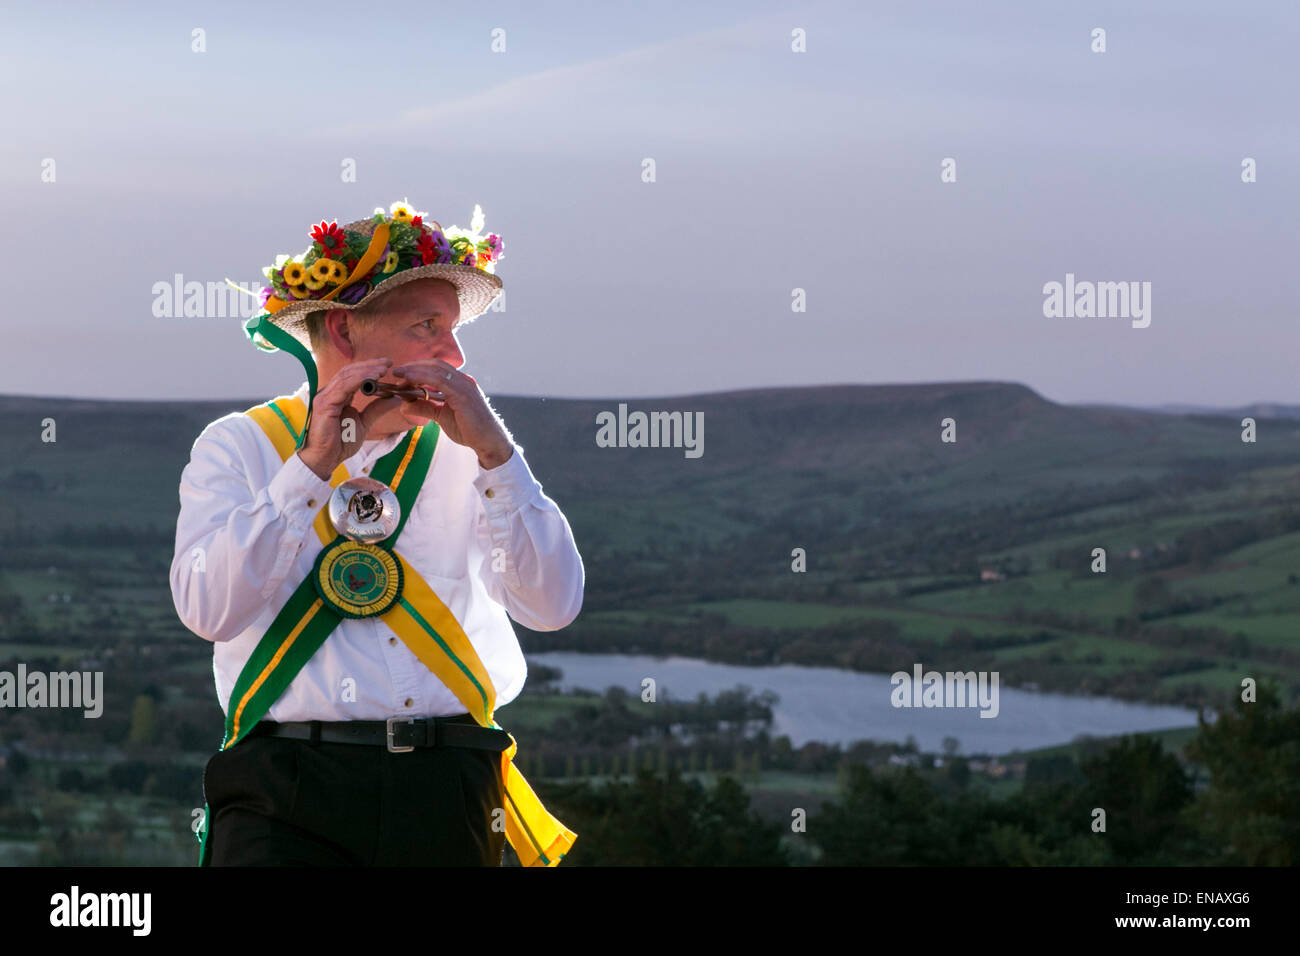 Morris dancers from the Chapel-en-le-Frith Morris Men dance at sunrise to welcome May Day on Eccles Pike Stock Photo